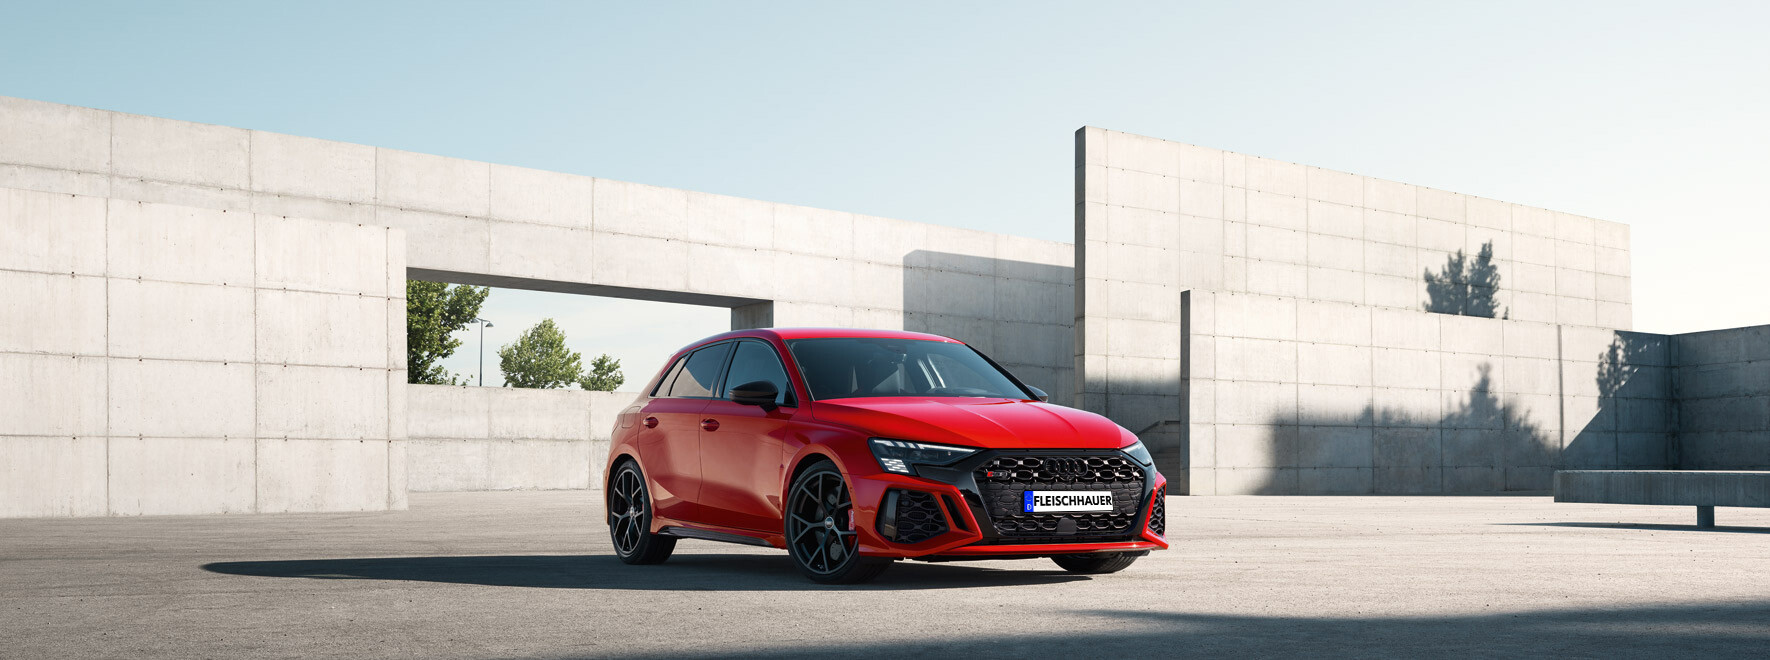 Audi RS 3 Sportback 294(400) kW(PS) S tronic | 